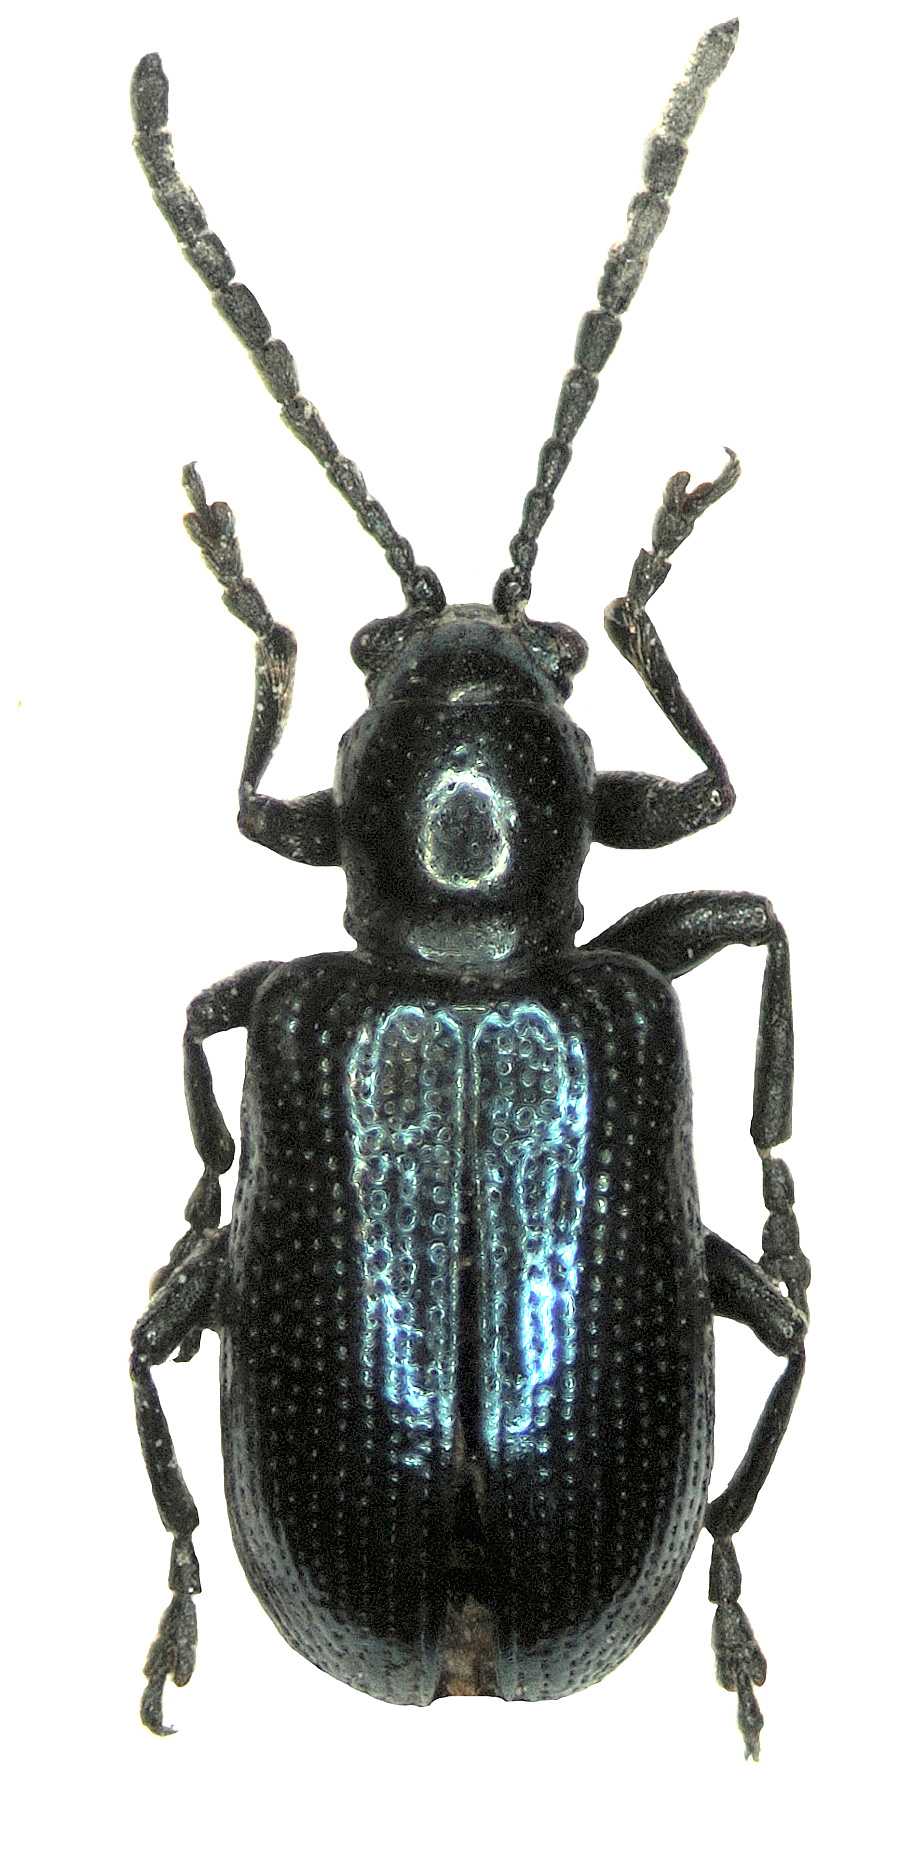 Oulema septentrionis Weise, 1880